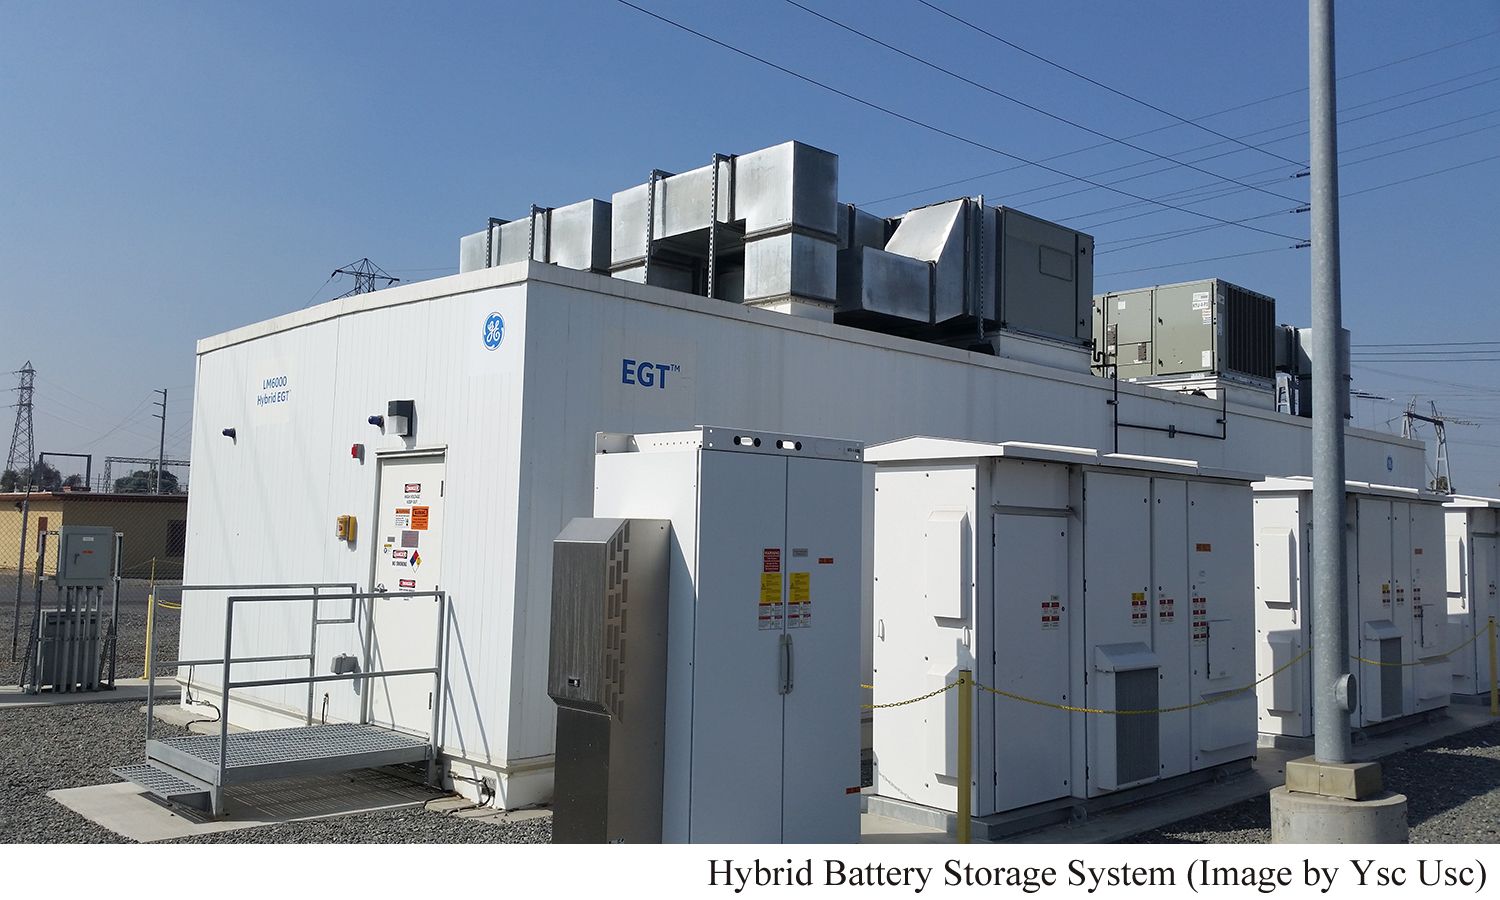 Battery storage is an infinitesimal part of electrical power 1